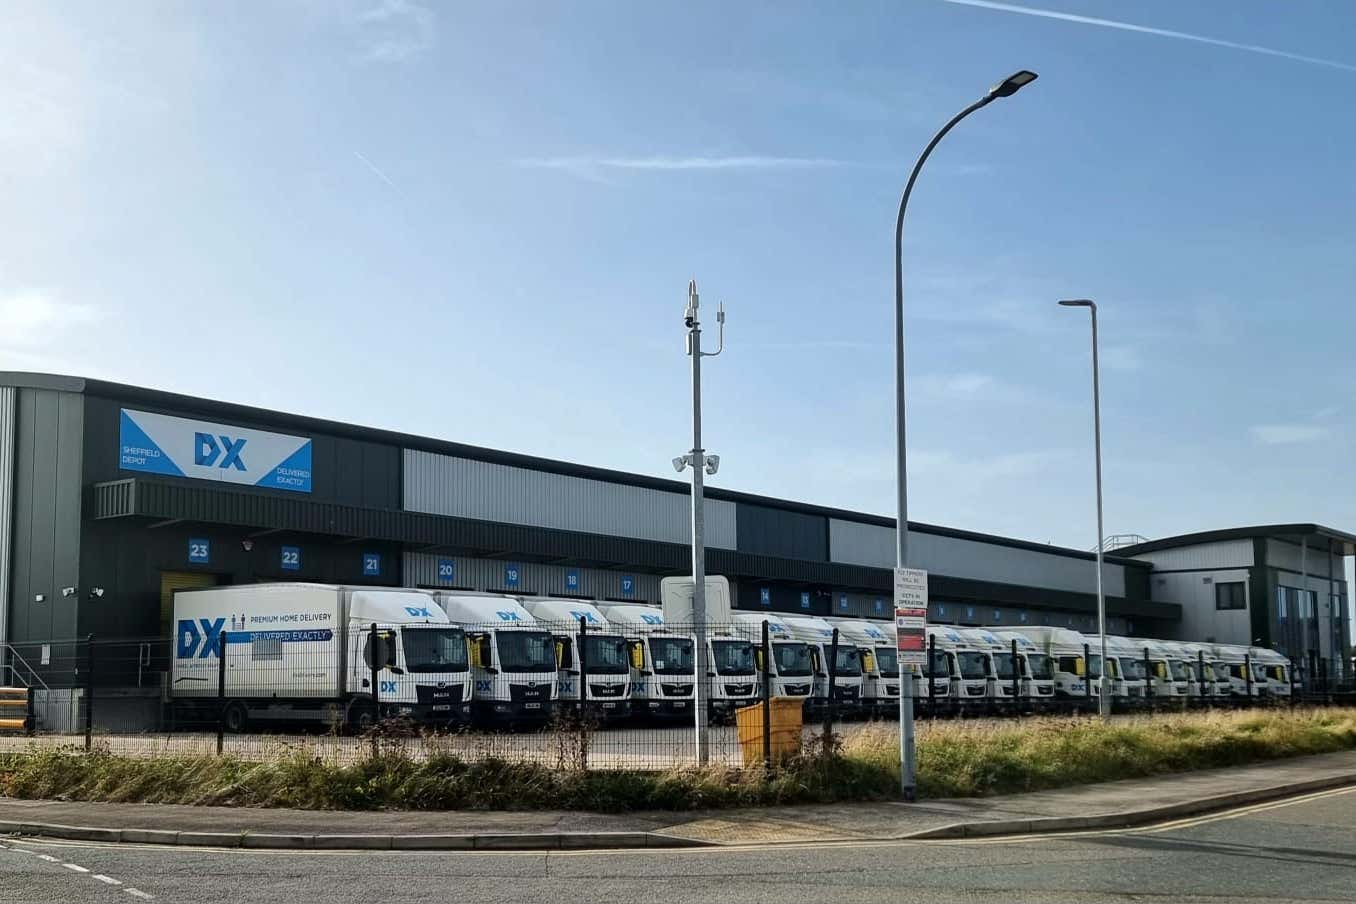 DX Group has reopened 10 further former Tuffnells depots after buying them in an administration deal (DX Group/PA)